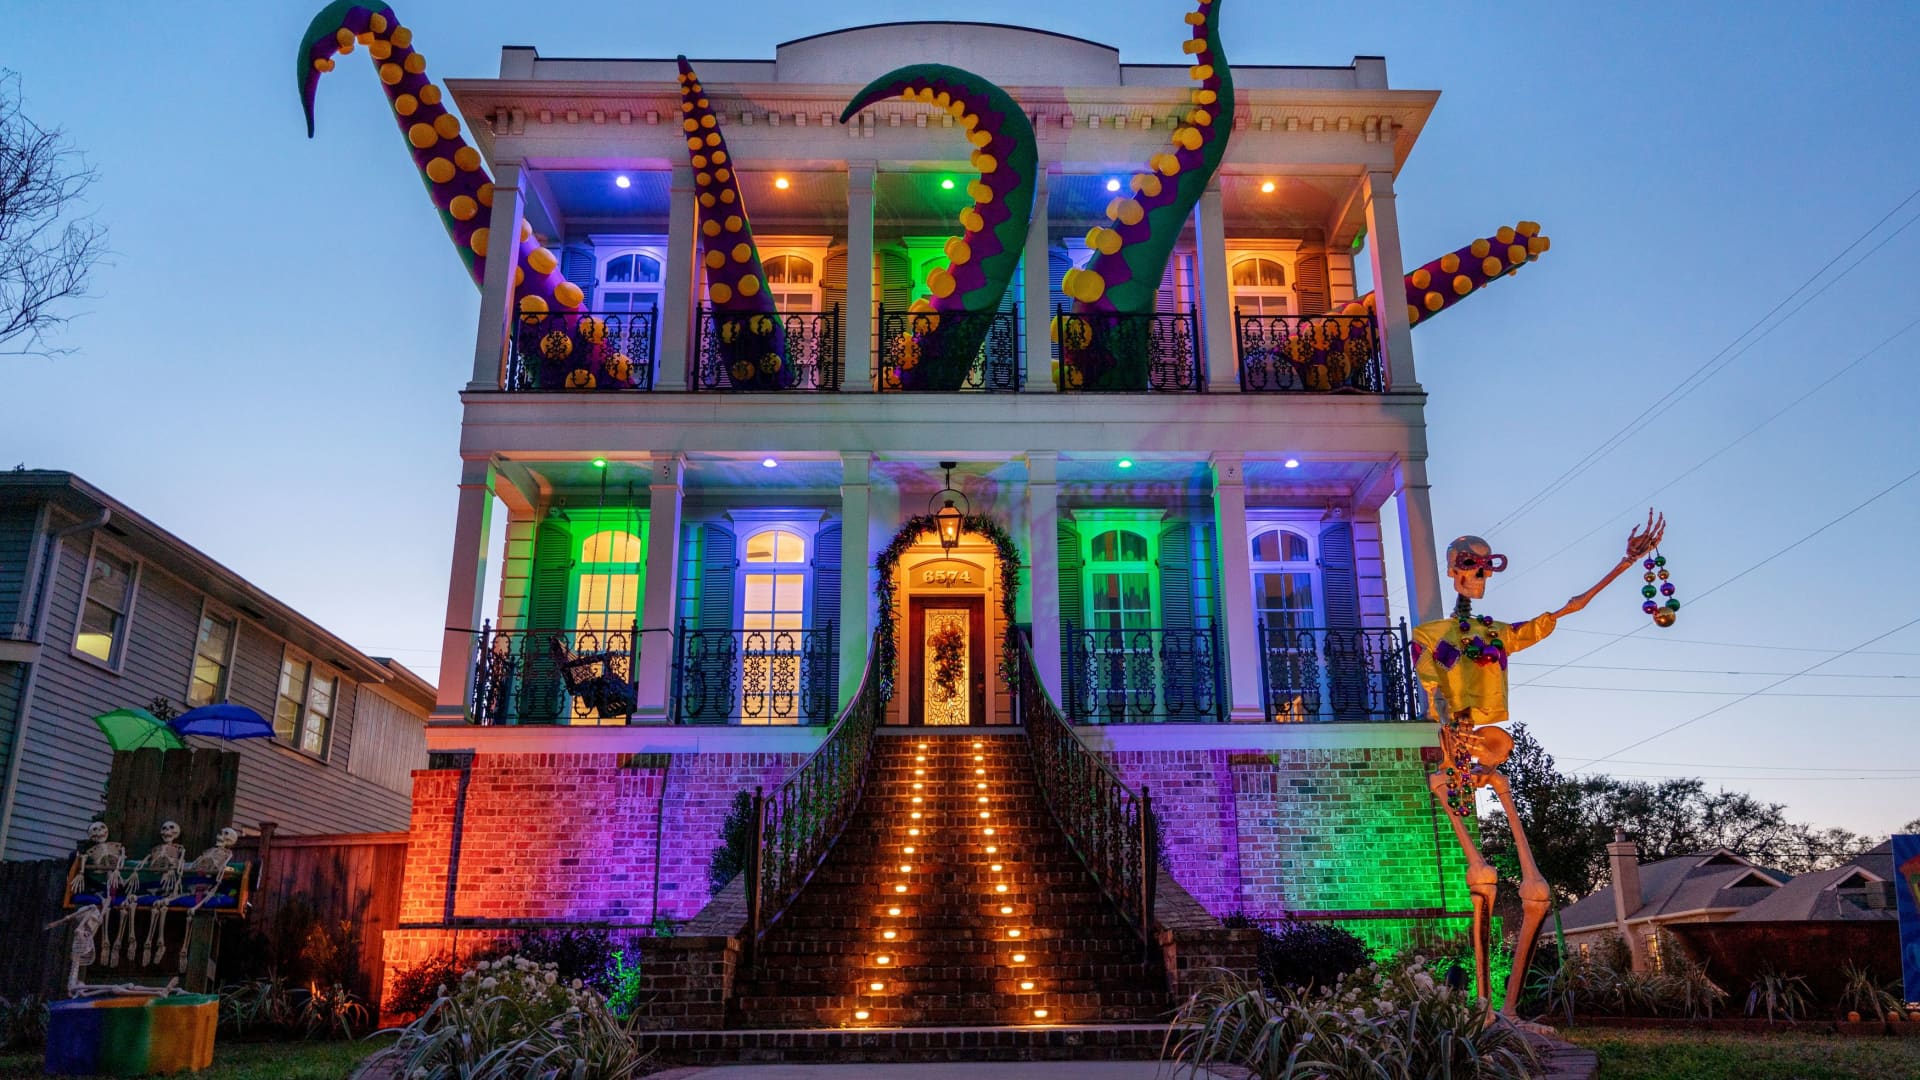 The Kraken house float, on Memphis St., in Lakeview, is one of thousands in the New Orleans area decorated in celebration of Mardi Gras in Louisiana, U.S., February 7, 2021.